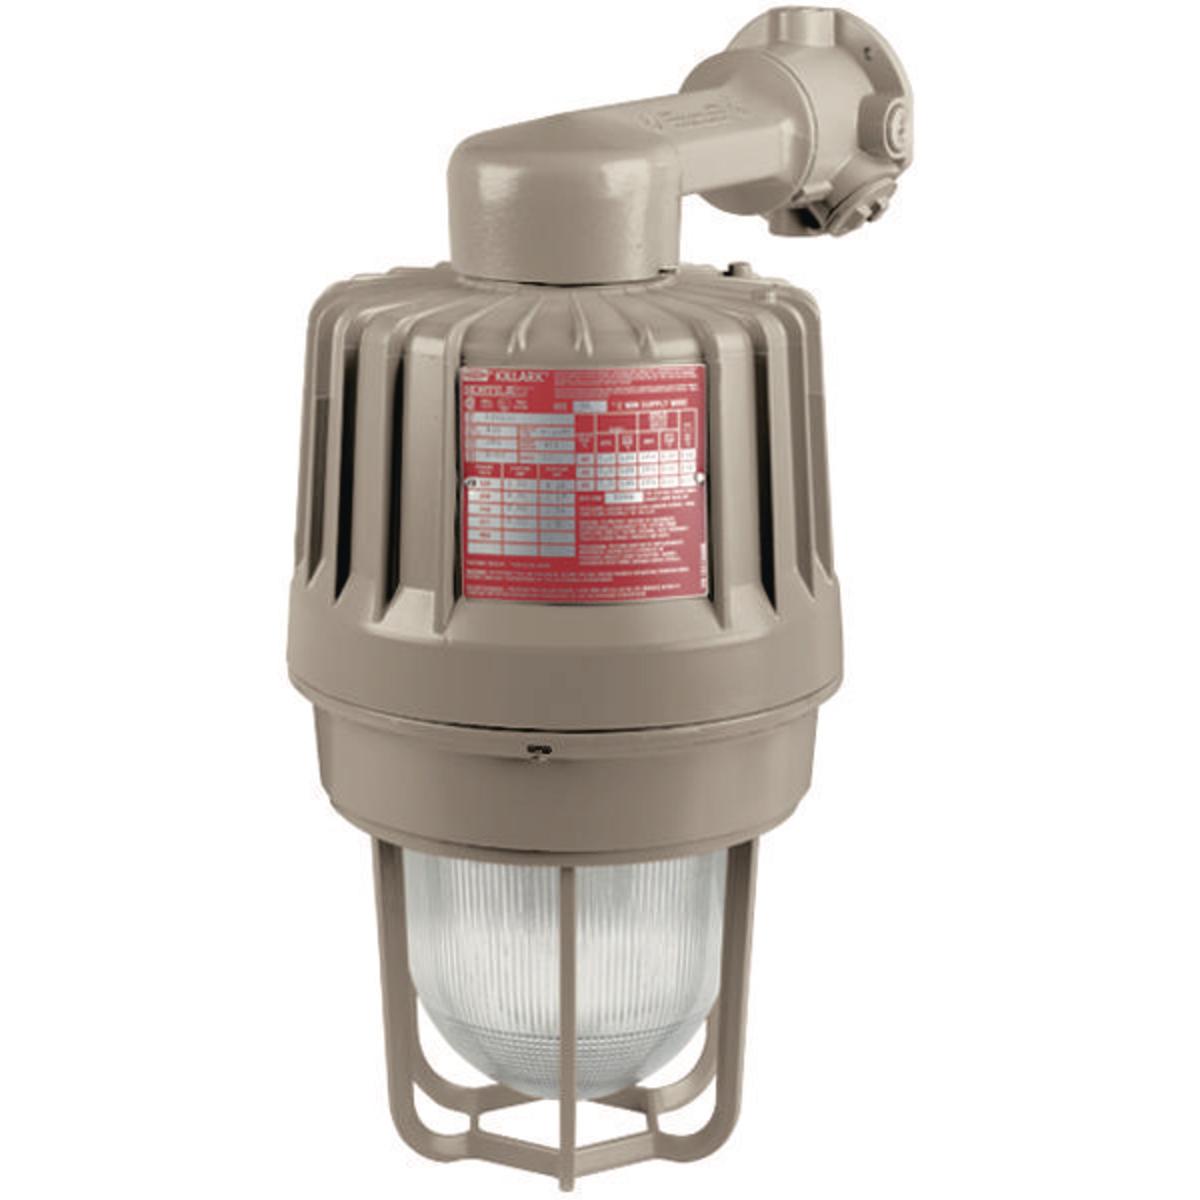 Hubbell EZS100B3 HID 100W Quadri-Volt High Pressure Sodium 1" Wall Mount  ; Three light sources – High Pressure Sodium (50-400W), Metal Halide (70-400W) and Pulse Start Metal Halide (175-400W) ; Mounting choice –Pendant, ceiling, 25˚ stanchion or 90˚ wall mount, all with 